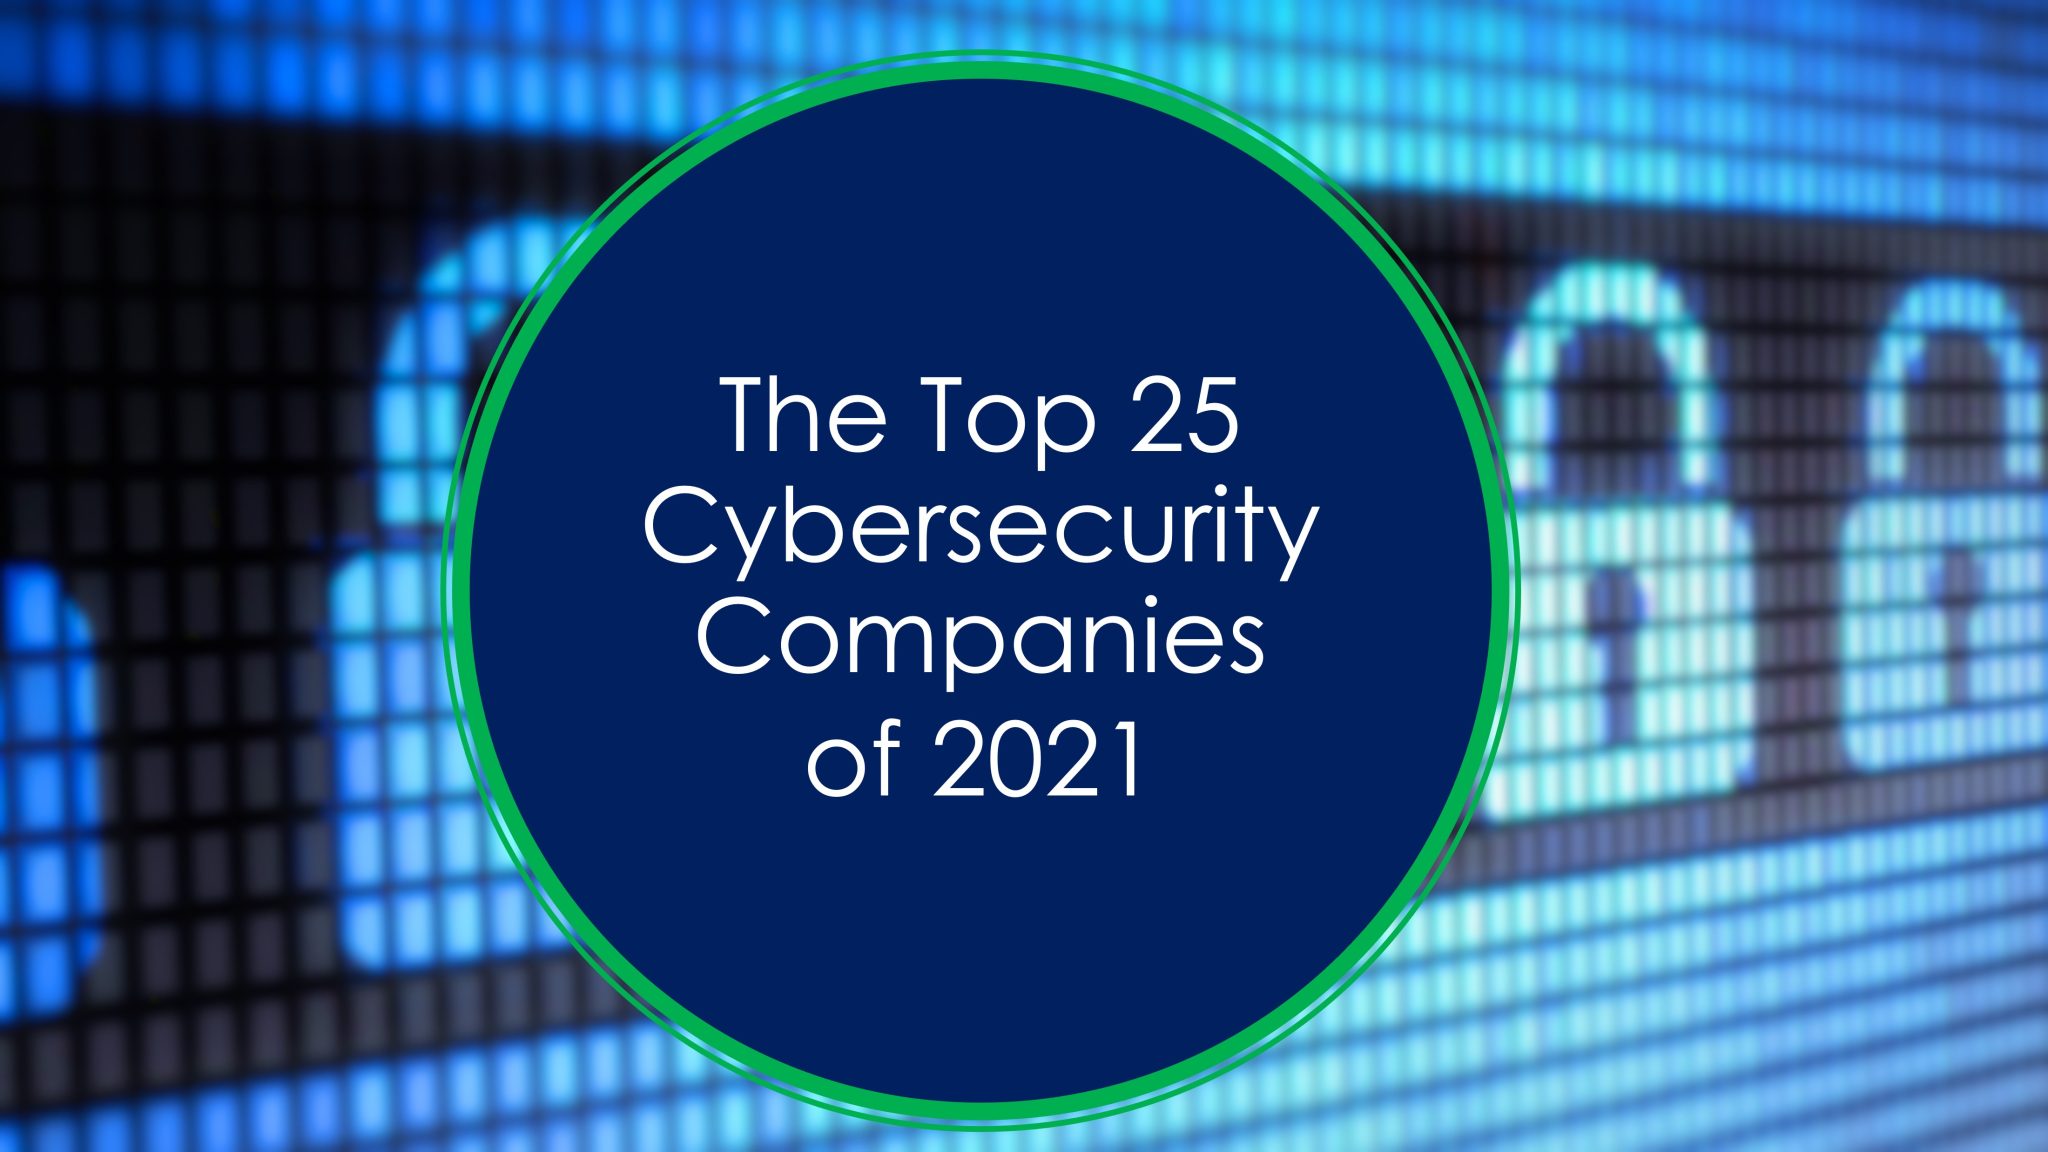 The Top 25 Cybersecurity Companies of 2021